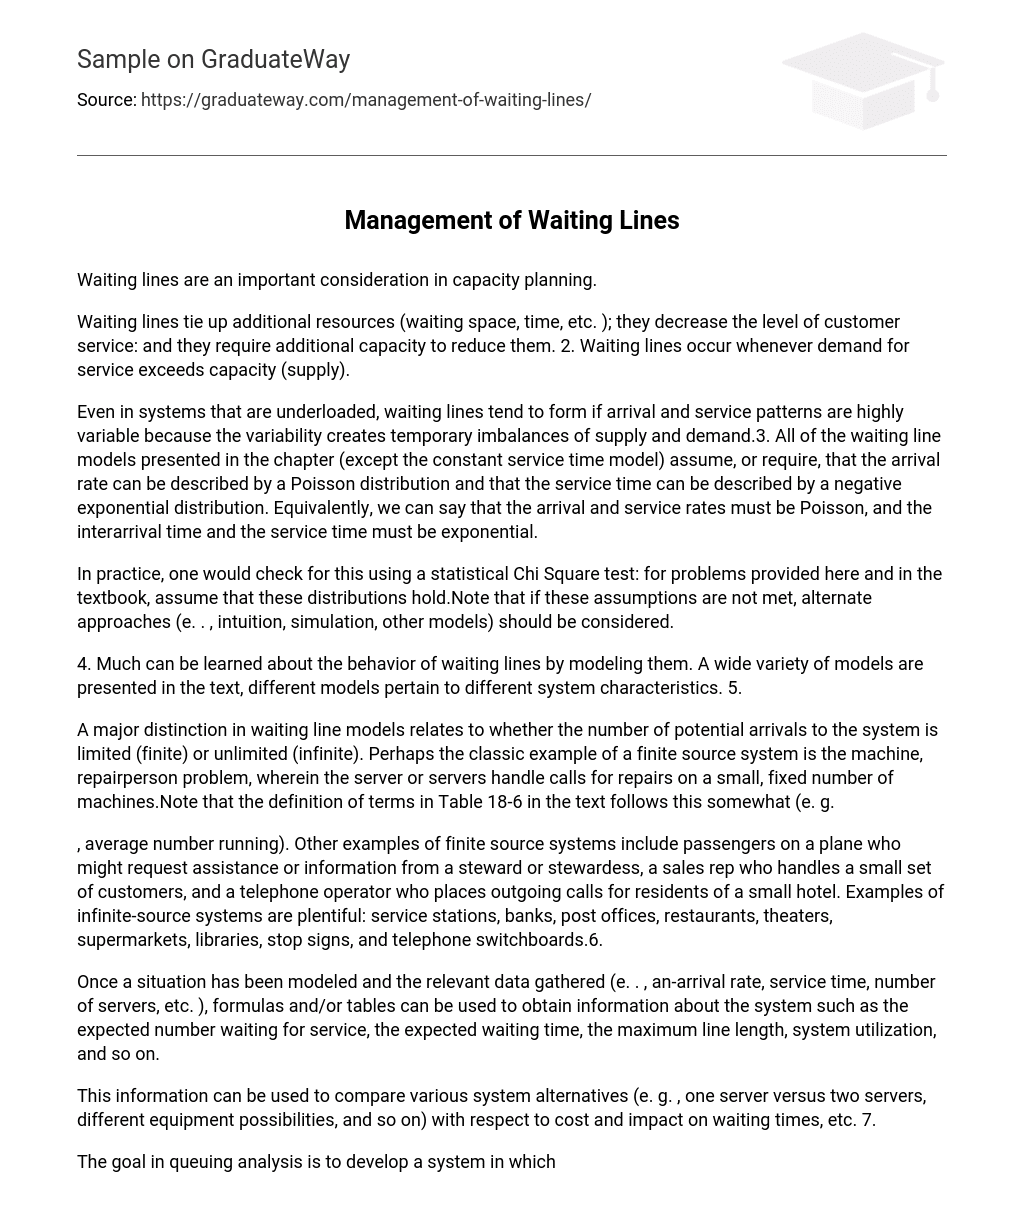 Management of Waiting Lines